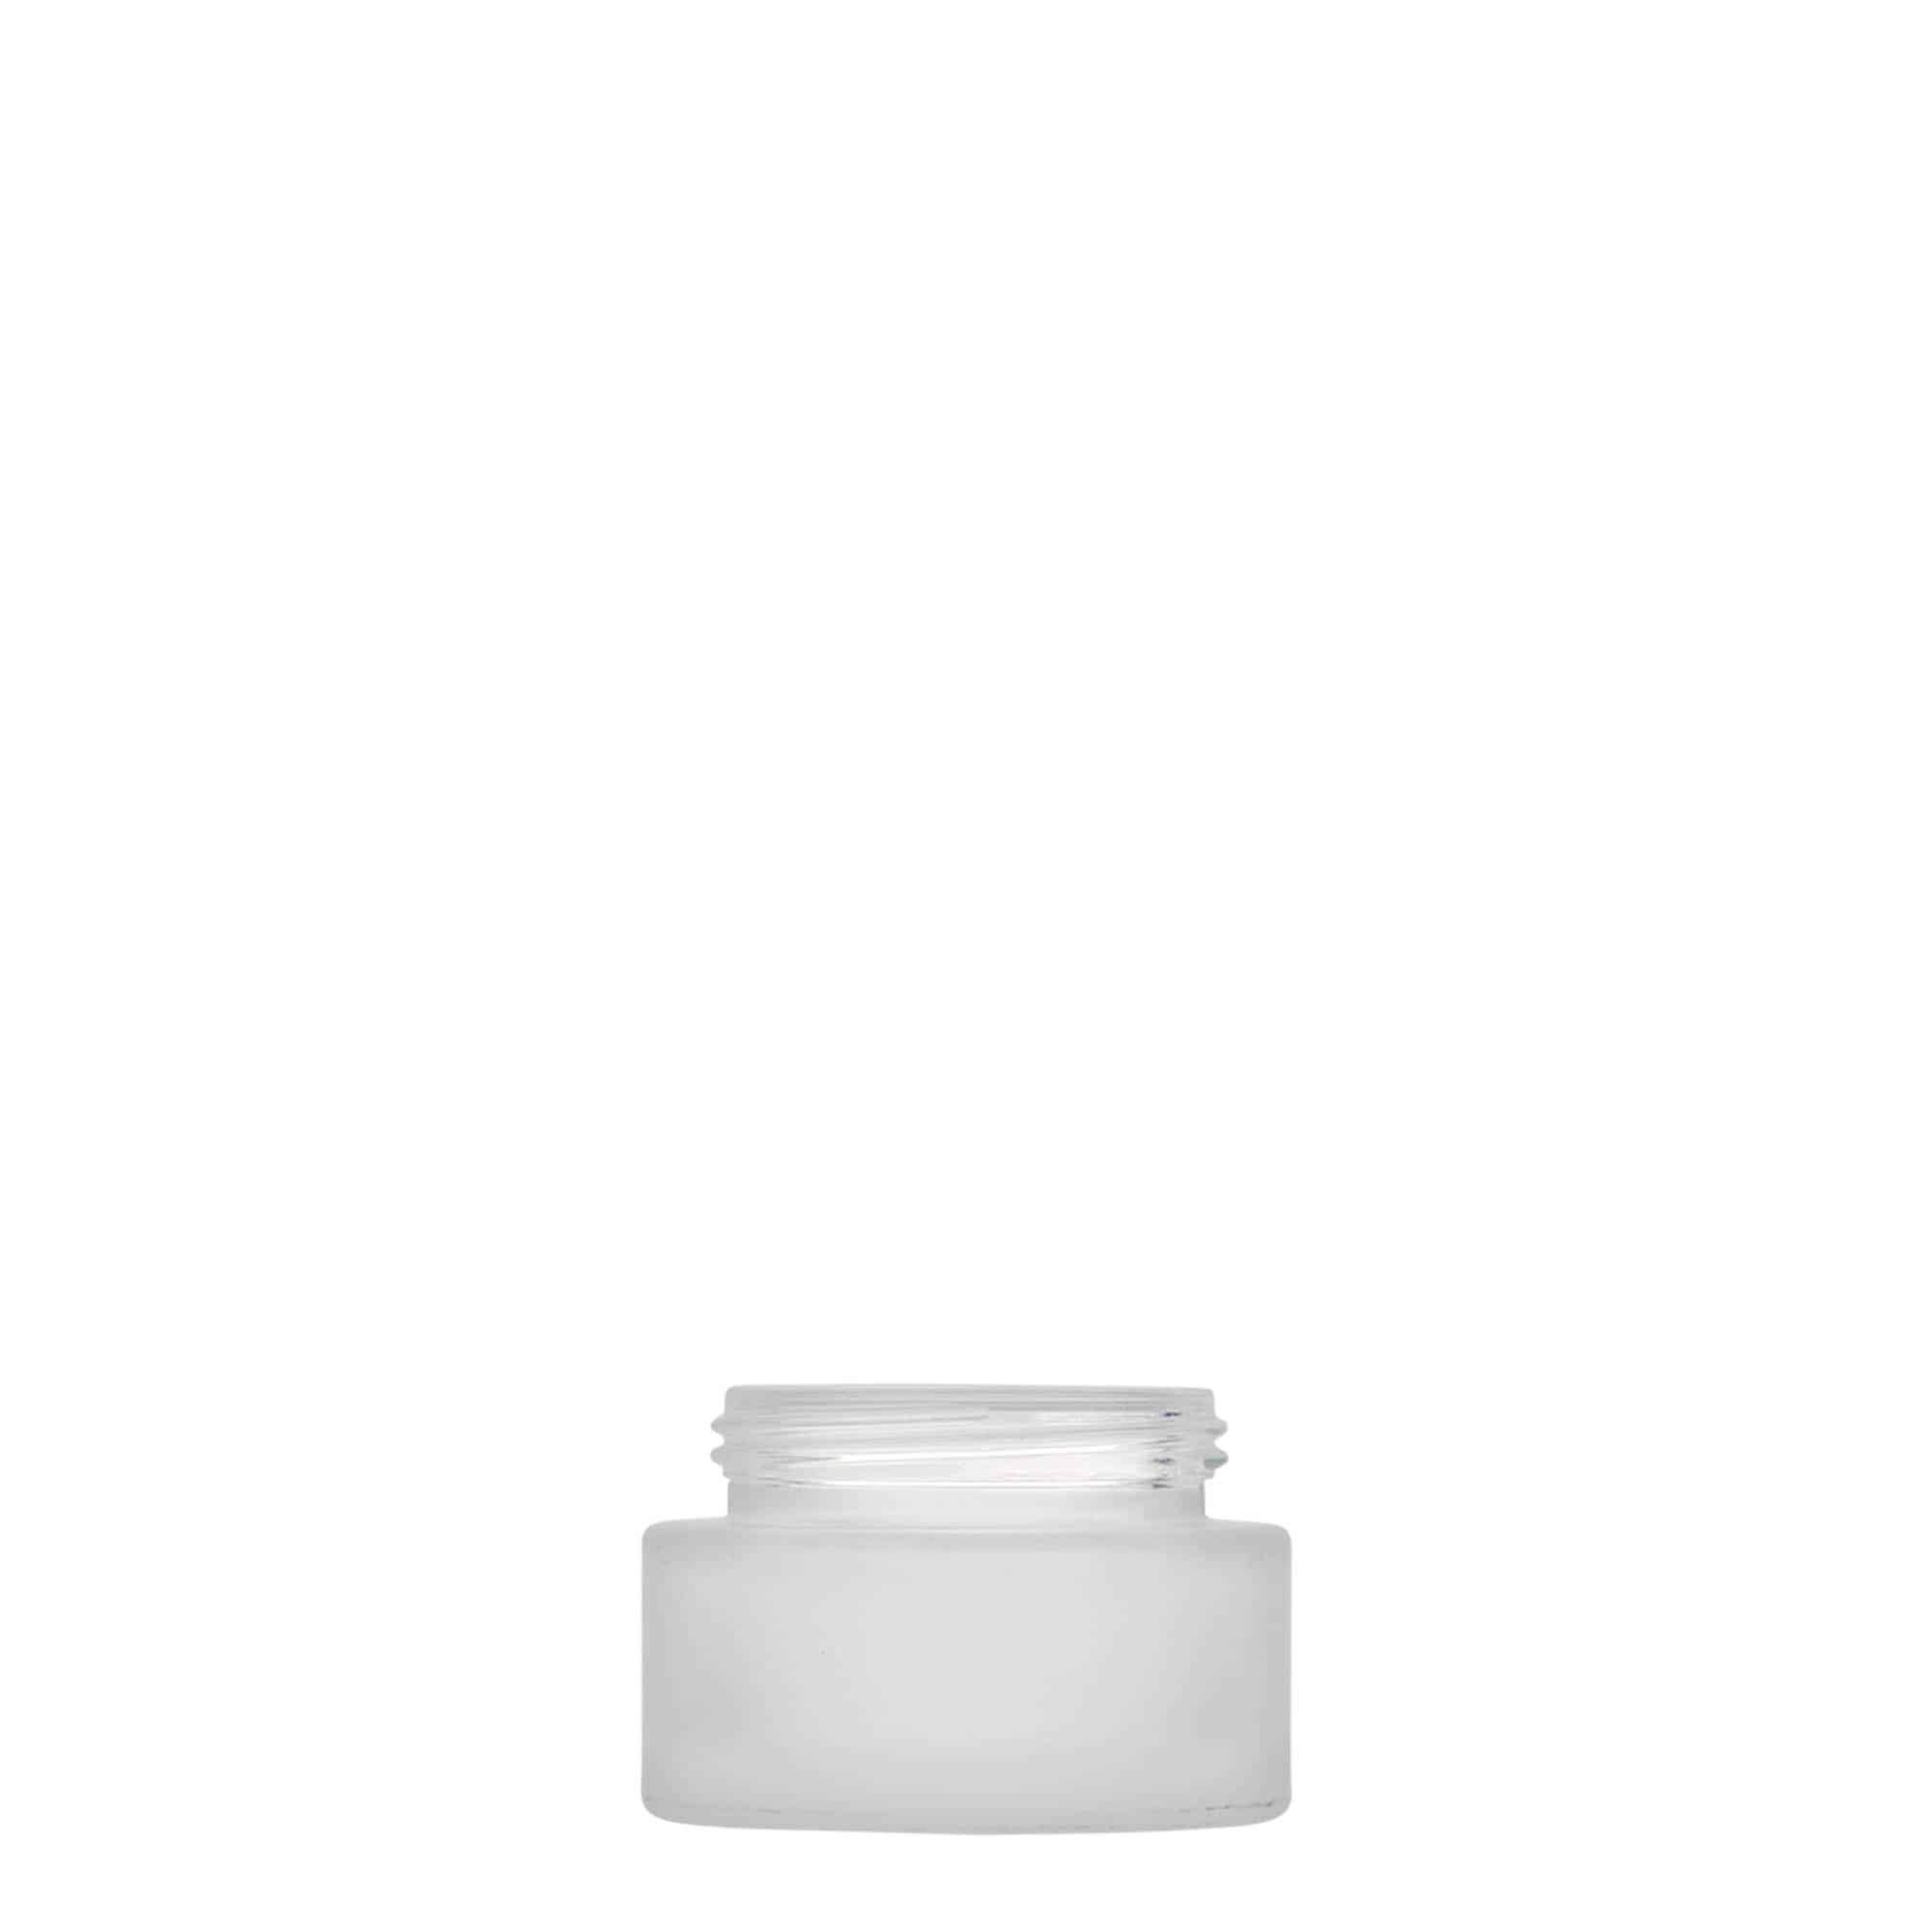 15 ml cosmetic jar 'Platin Edition', glass, frosted, closure: screw cap